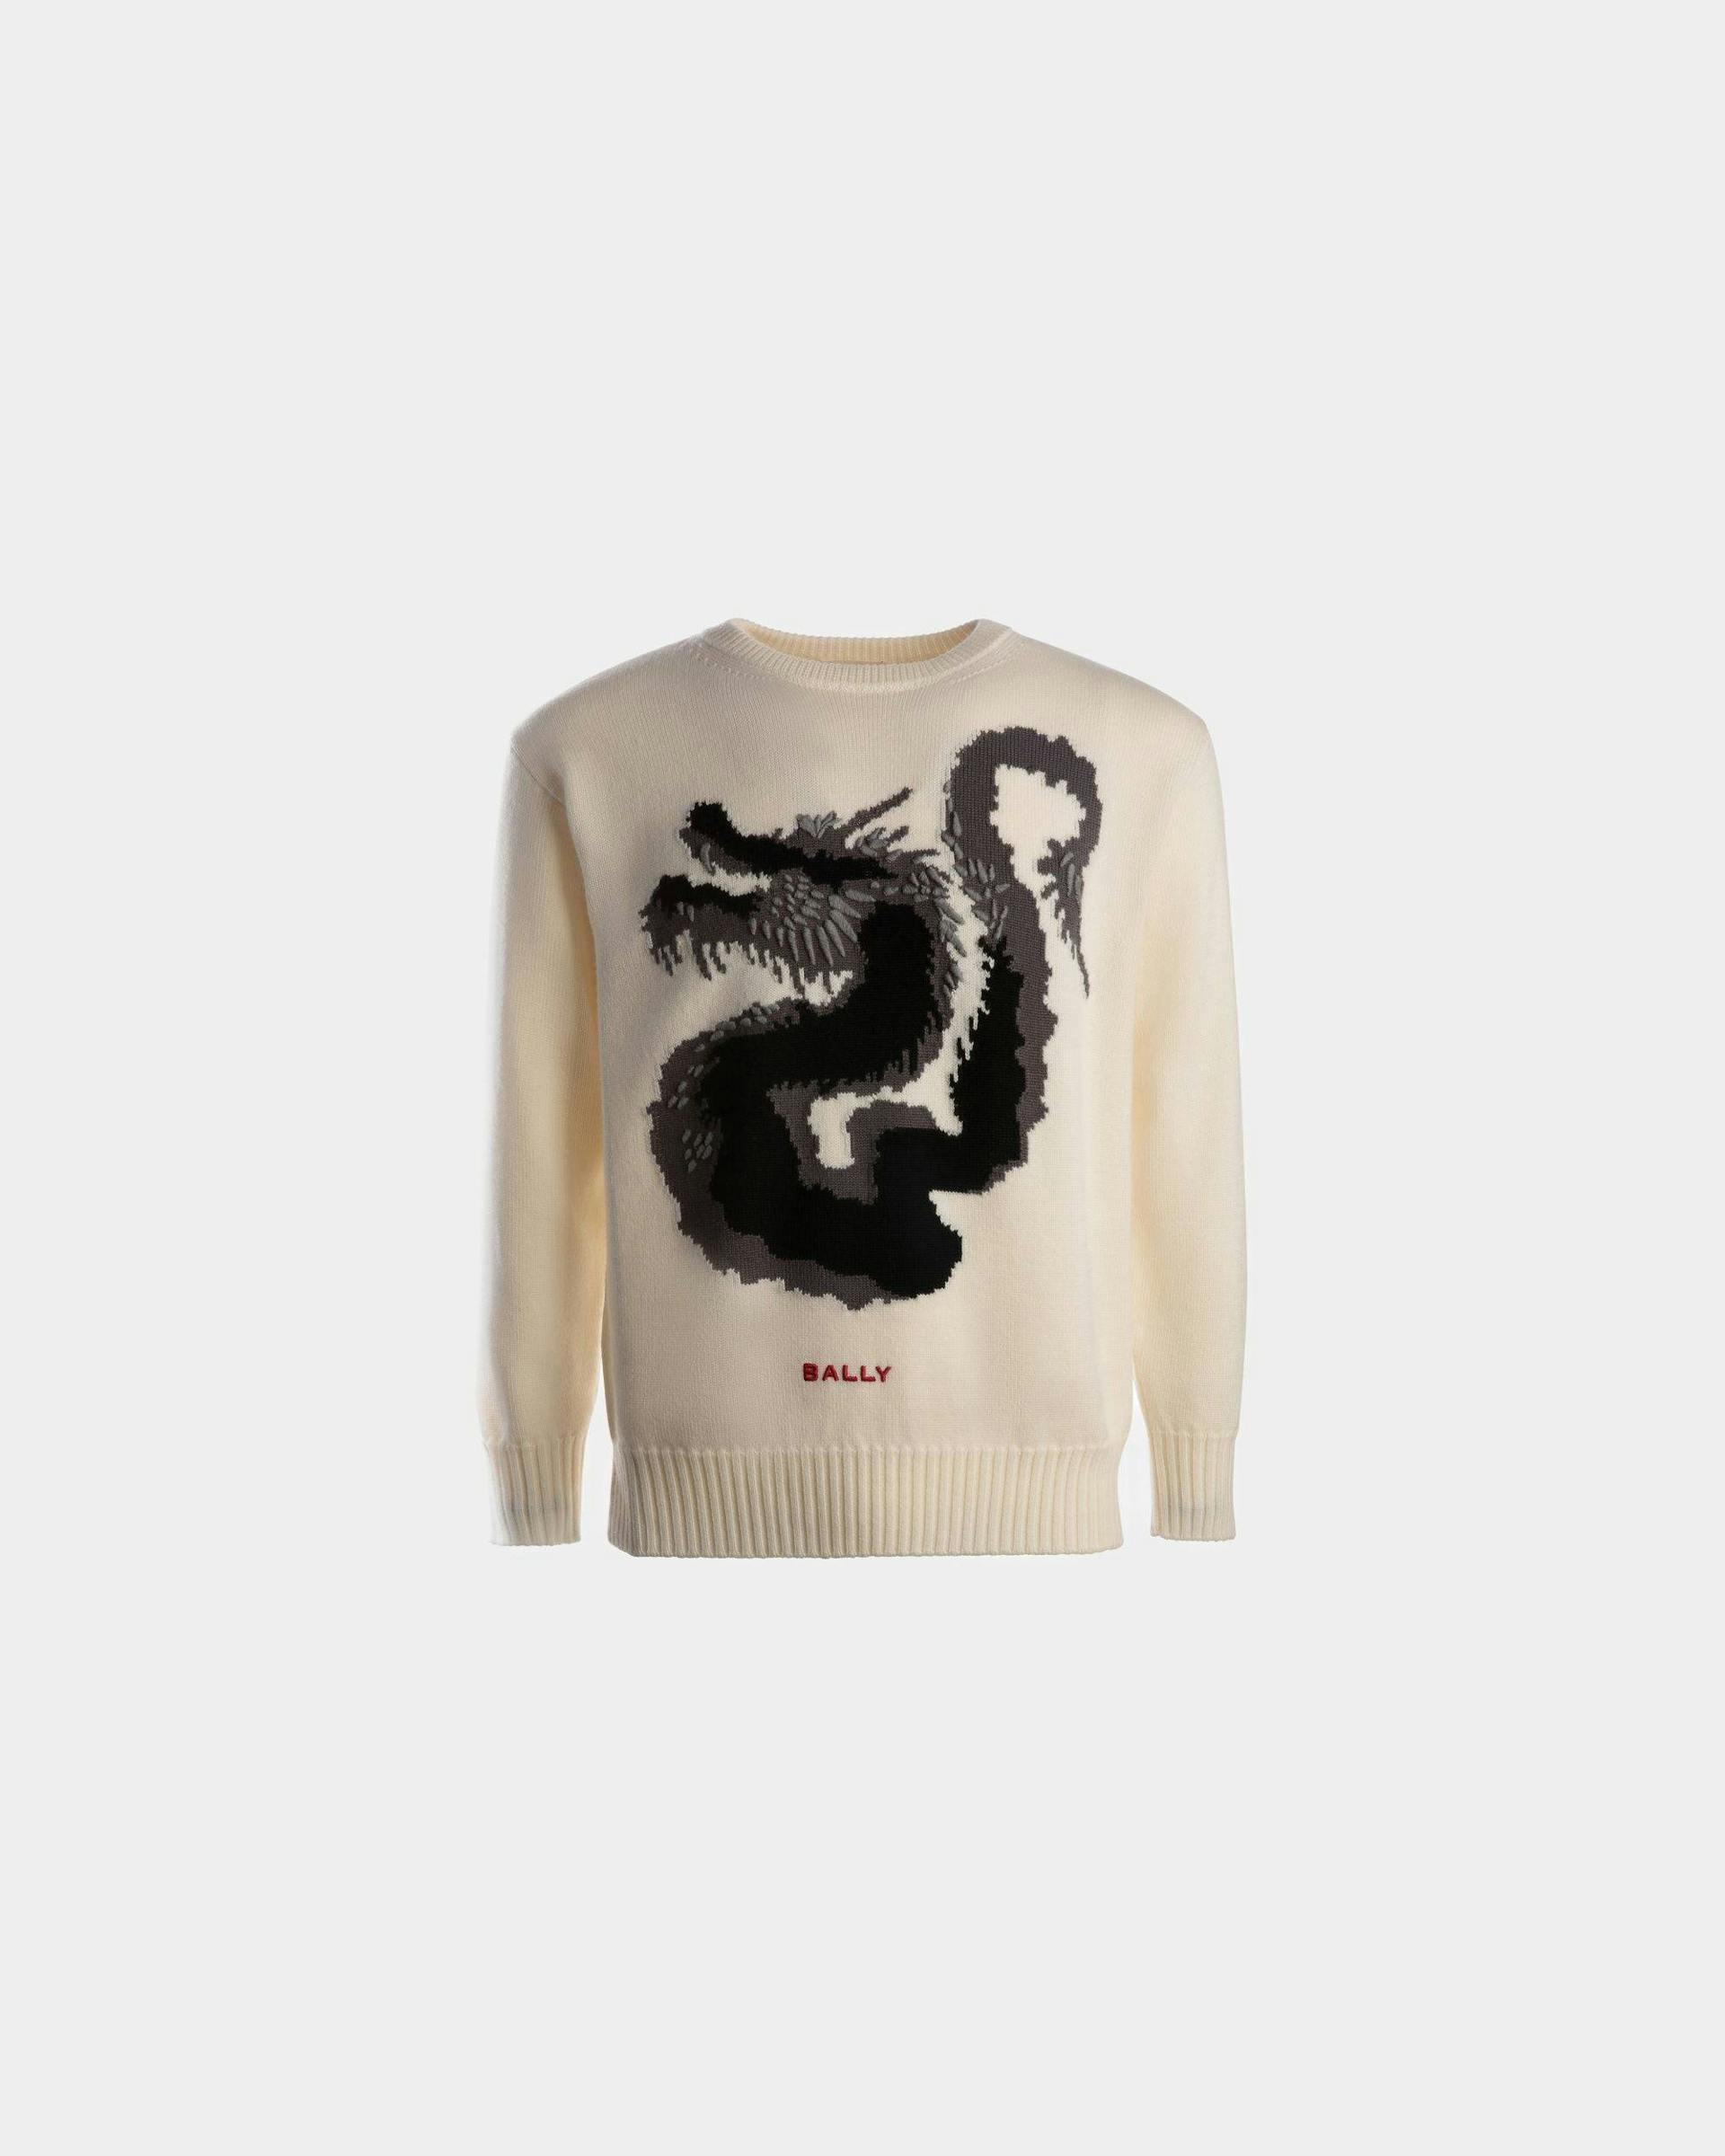 Men's Sweater in White Wool | Bally | Still Life Front